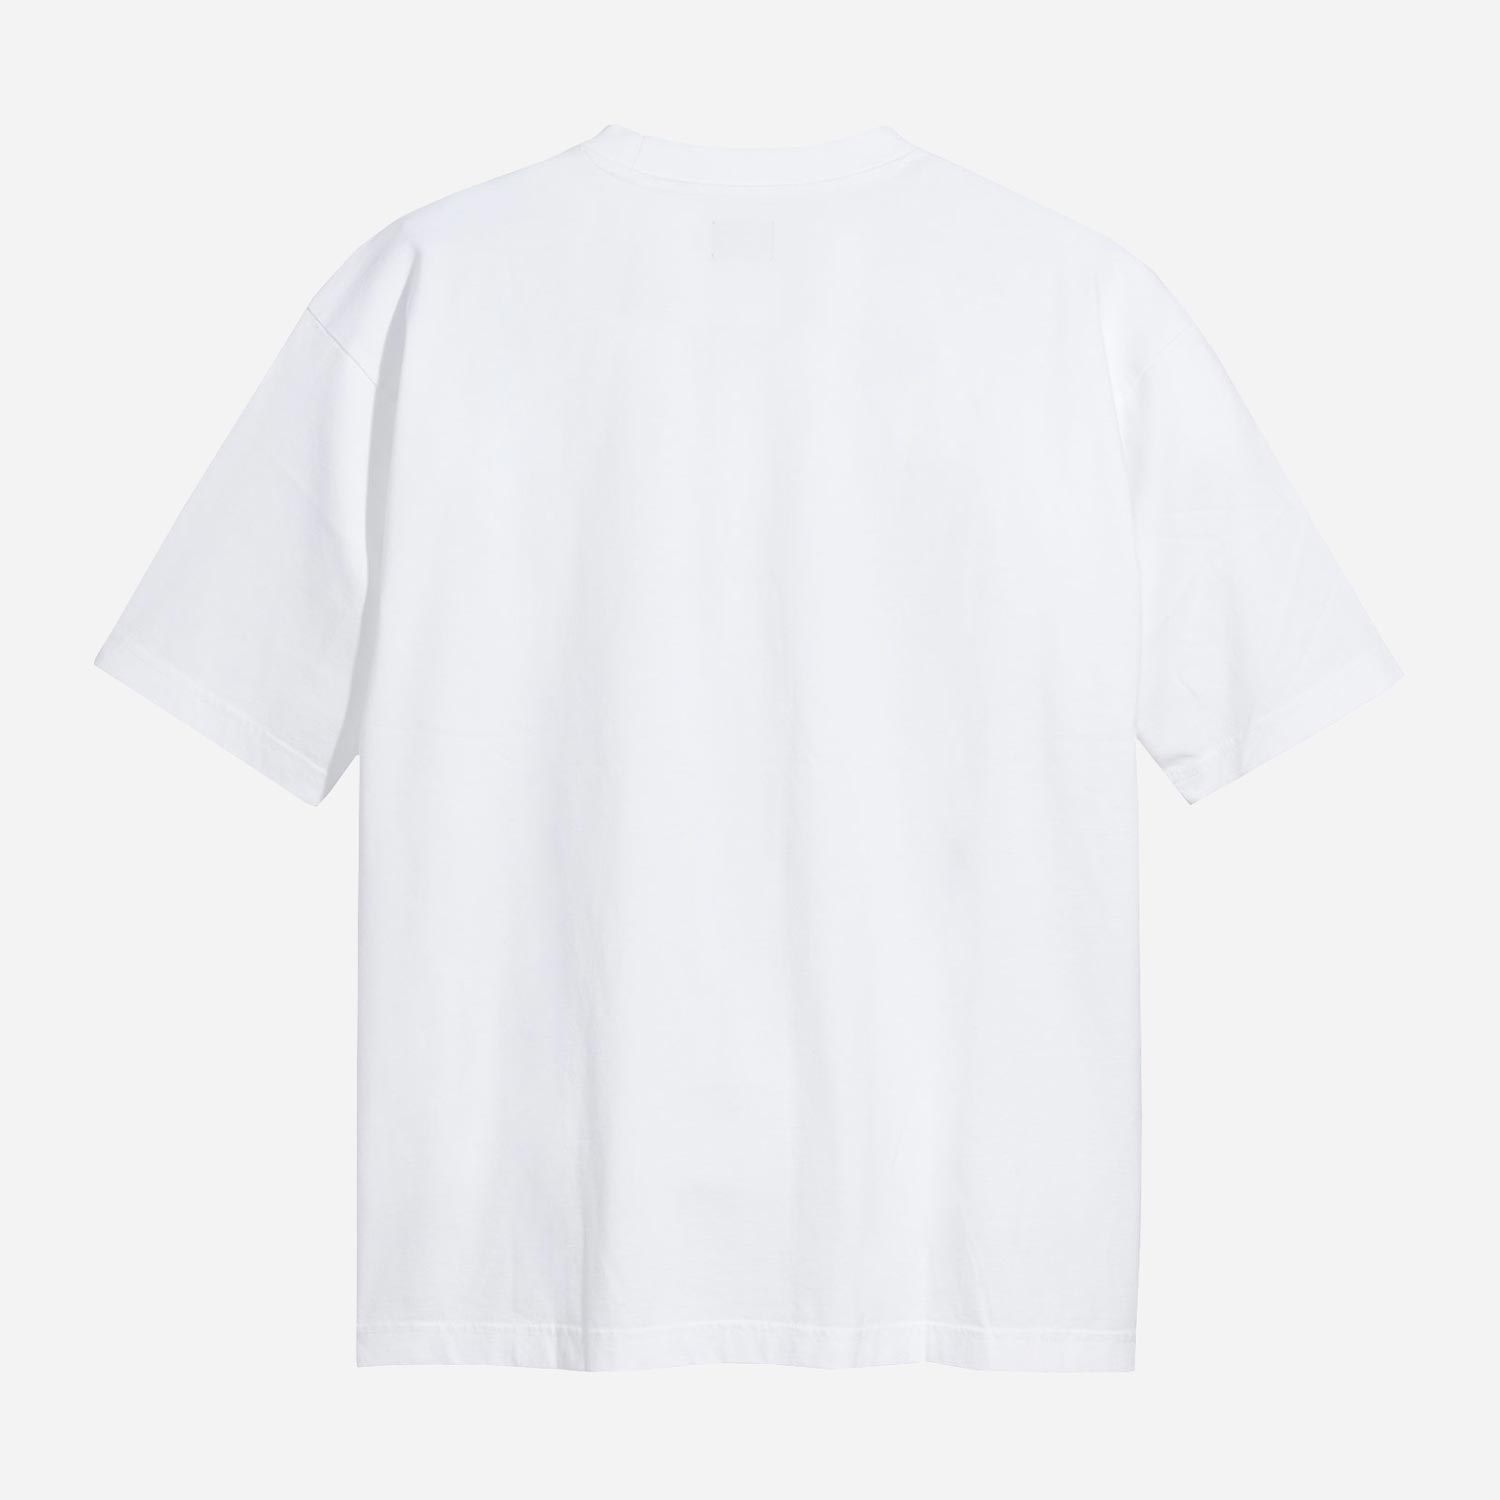 Levis Skateboarding Graphic Boxy Loose Fit Tee - White